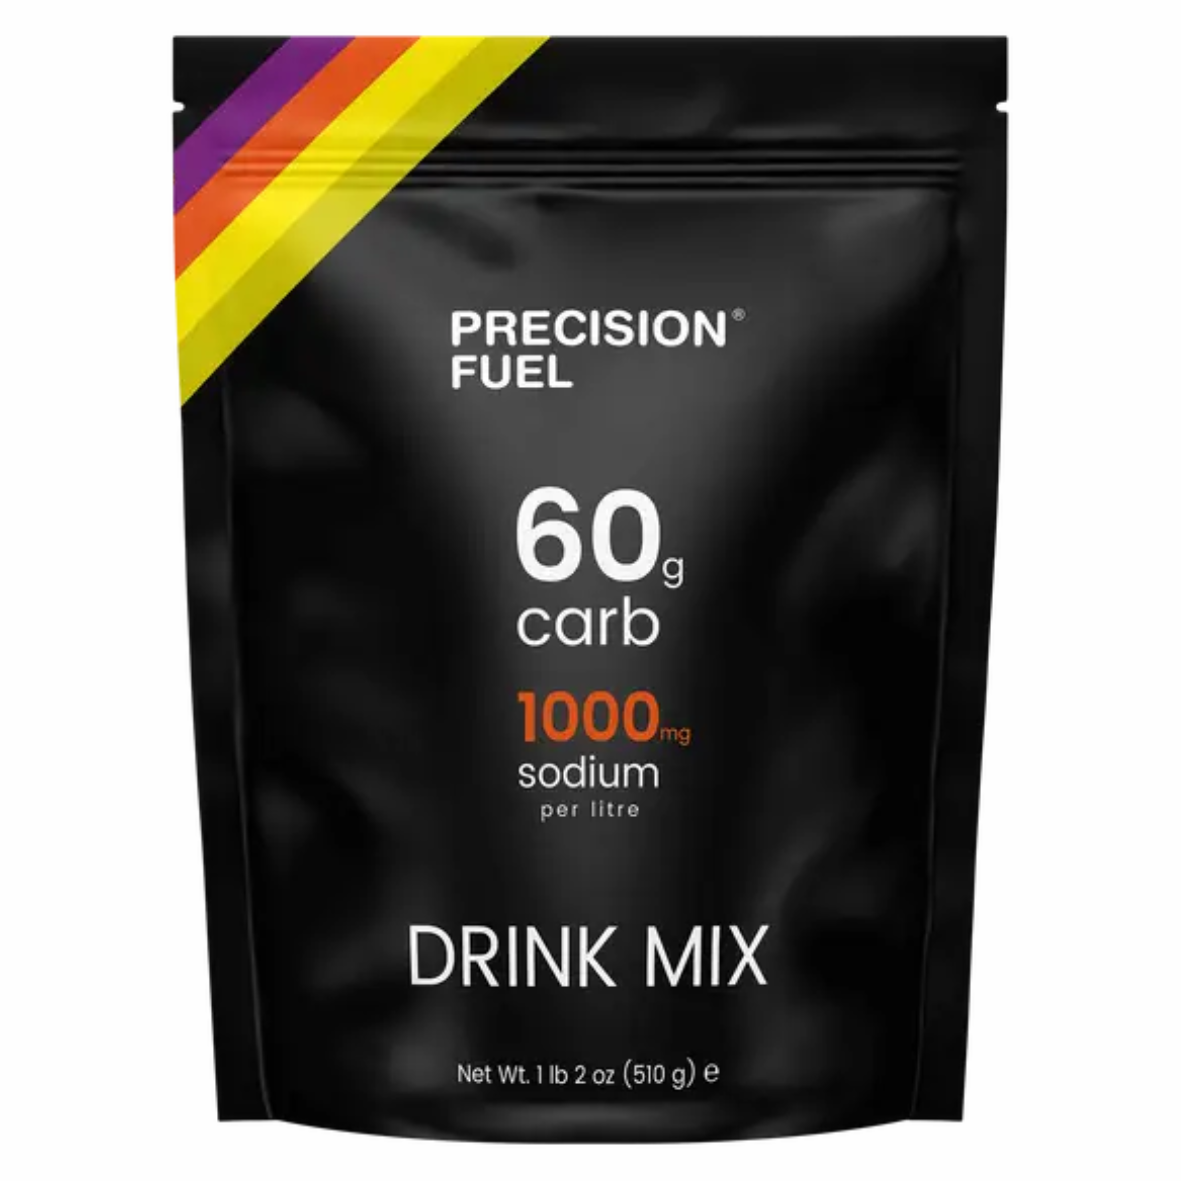 Precision Fuel & Hydration 30g Carb Drink Mix